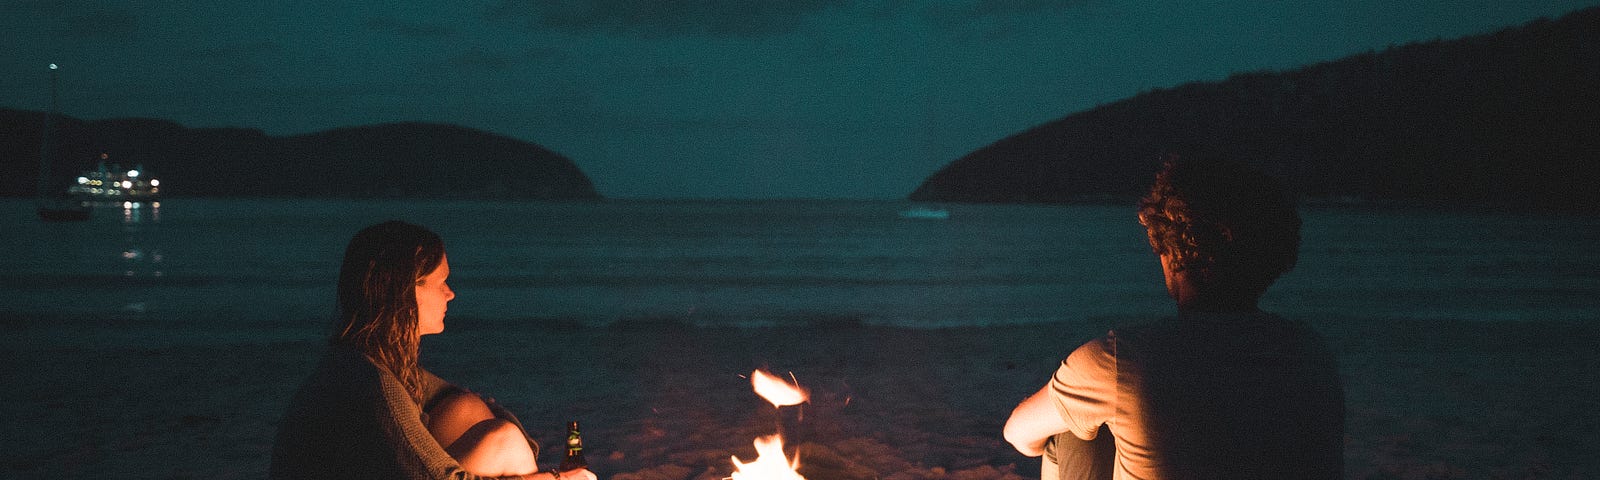 There Is a Fire — November Poem Competition — A Couple Sitting on the Beach with a Fire